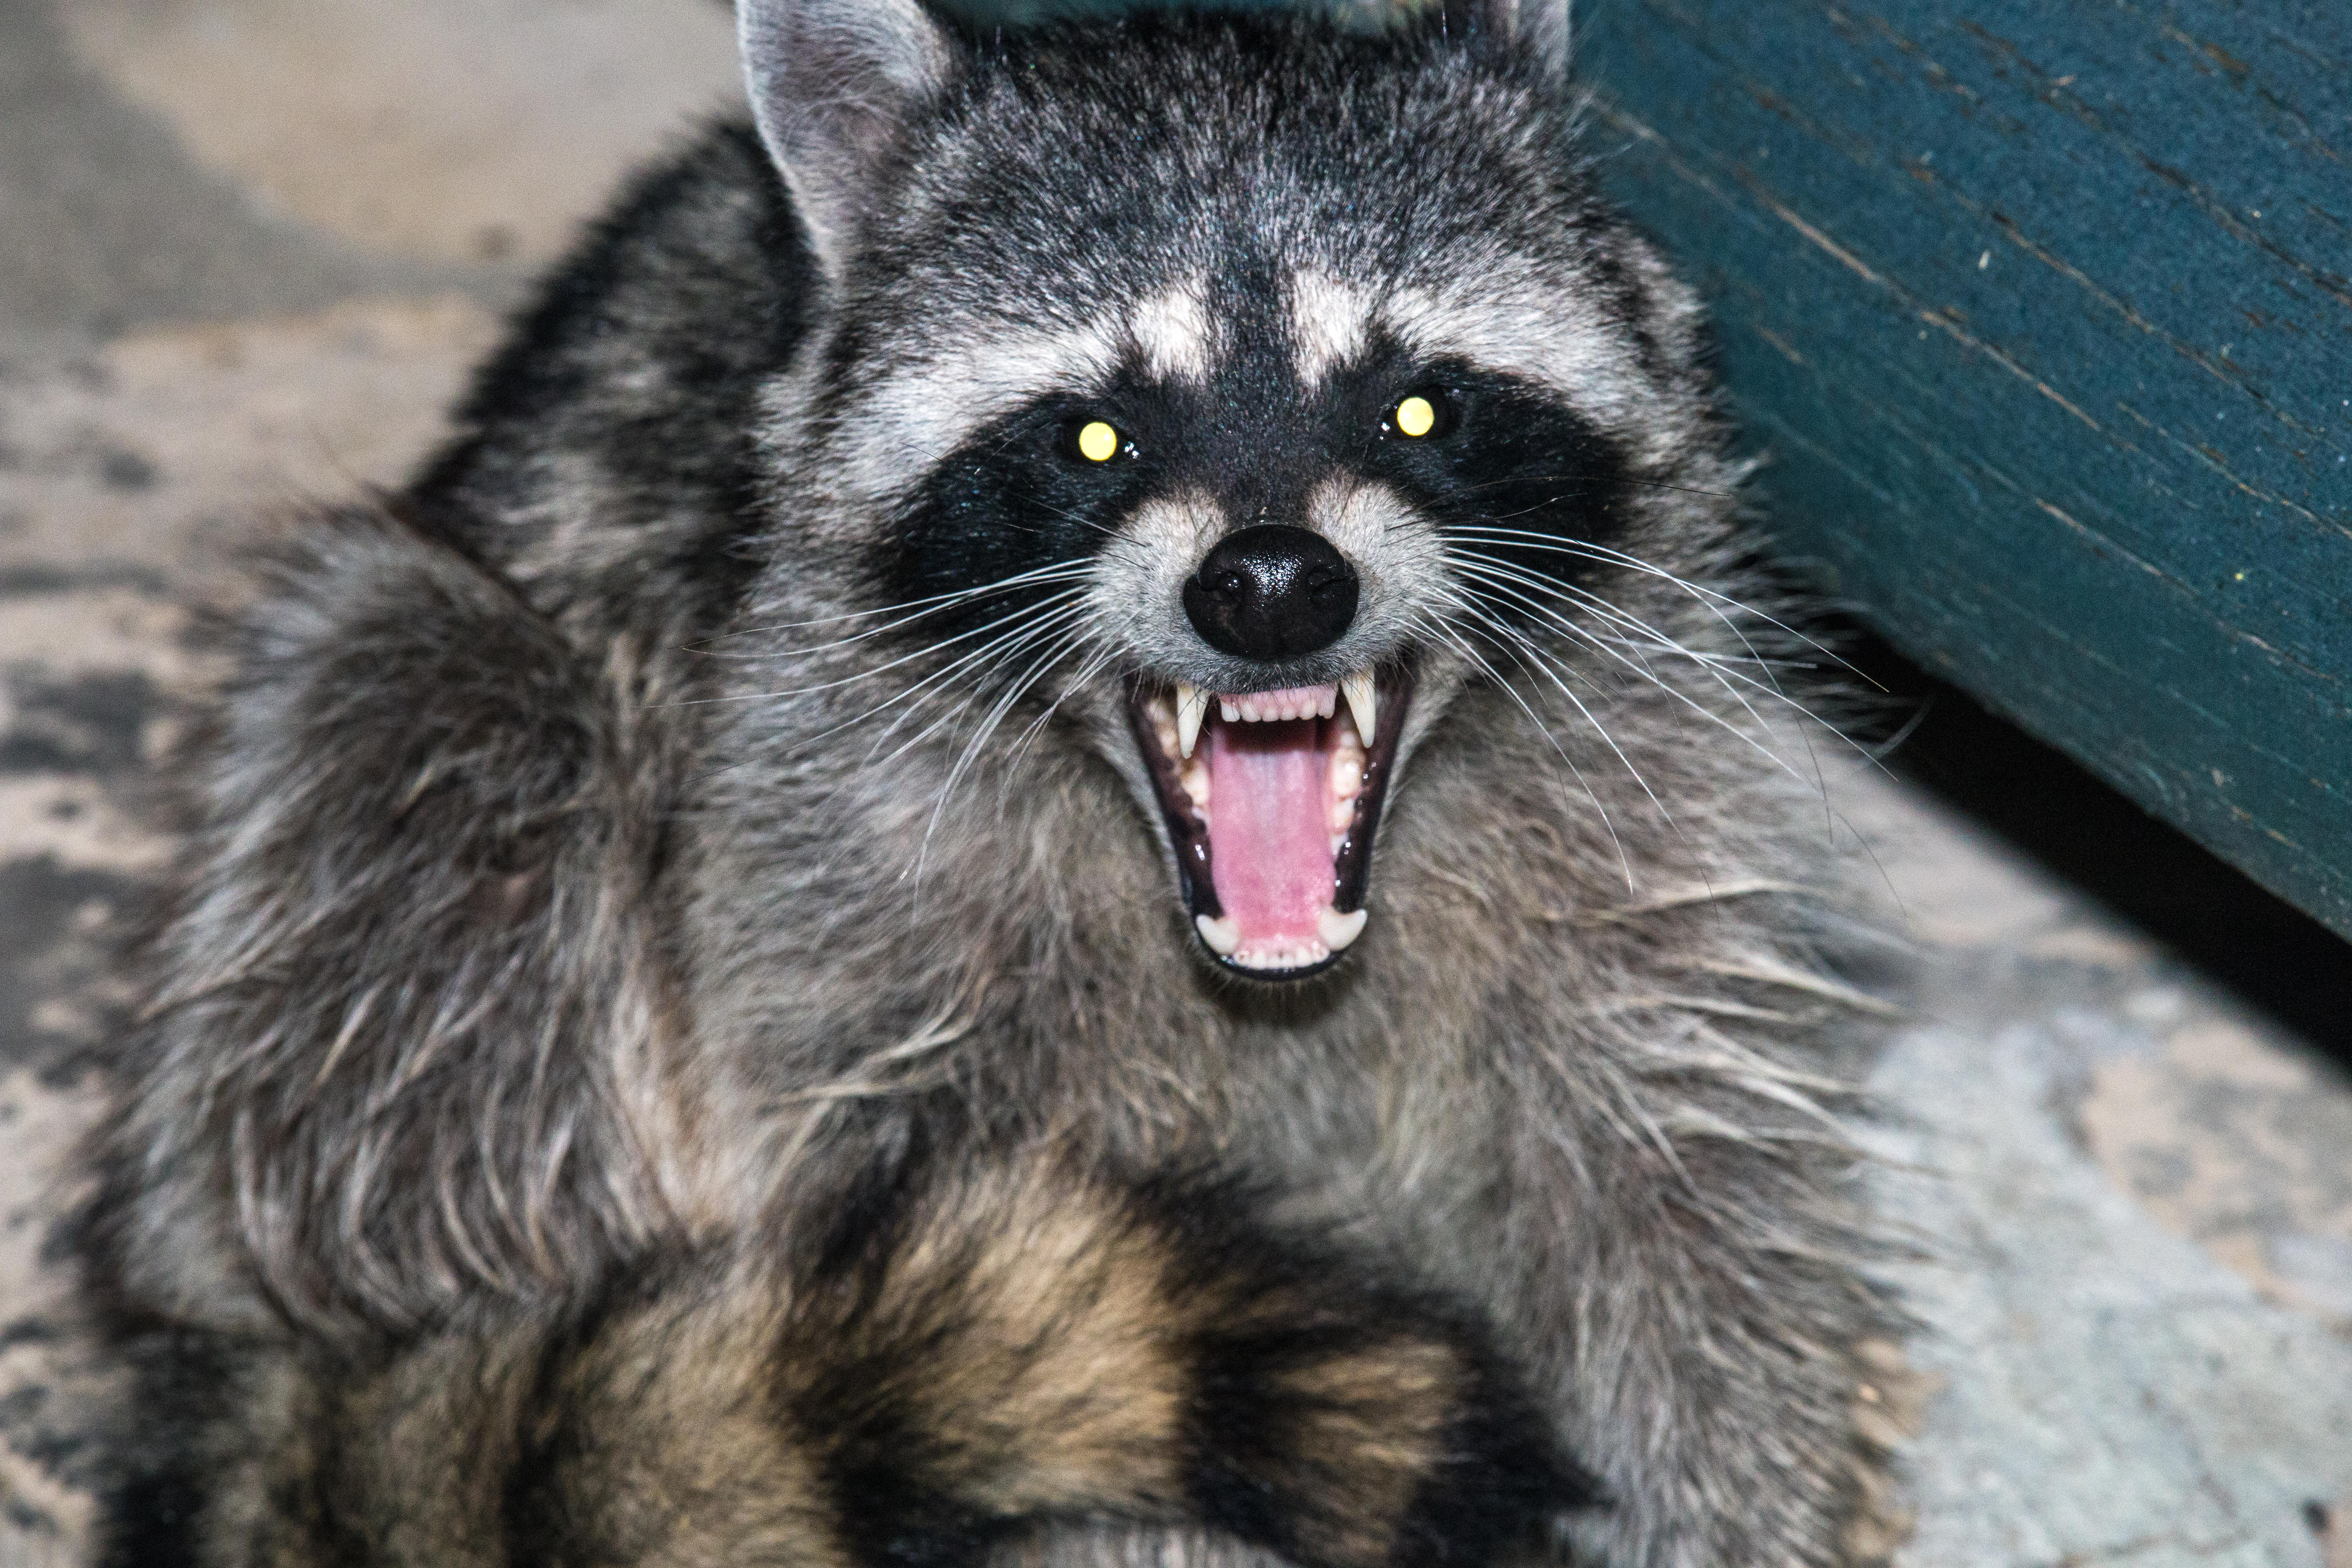 Summer is peak rabies season. Here's what you need to know - CBS News